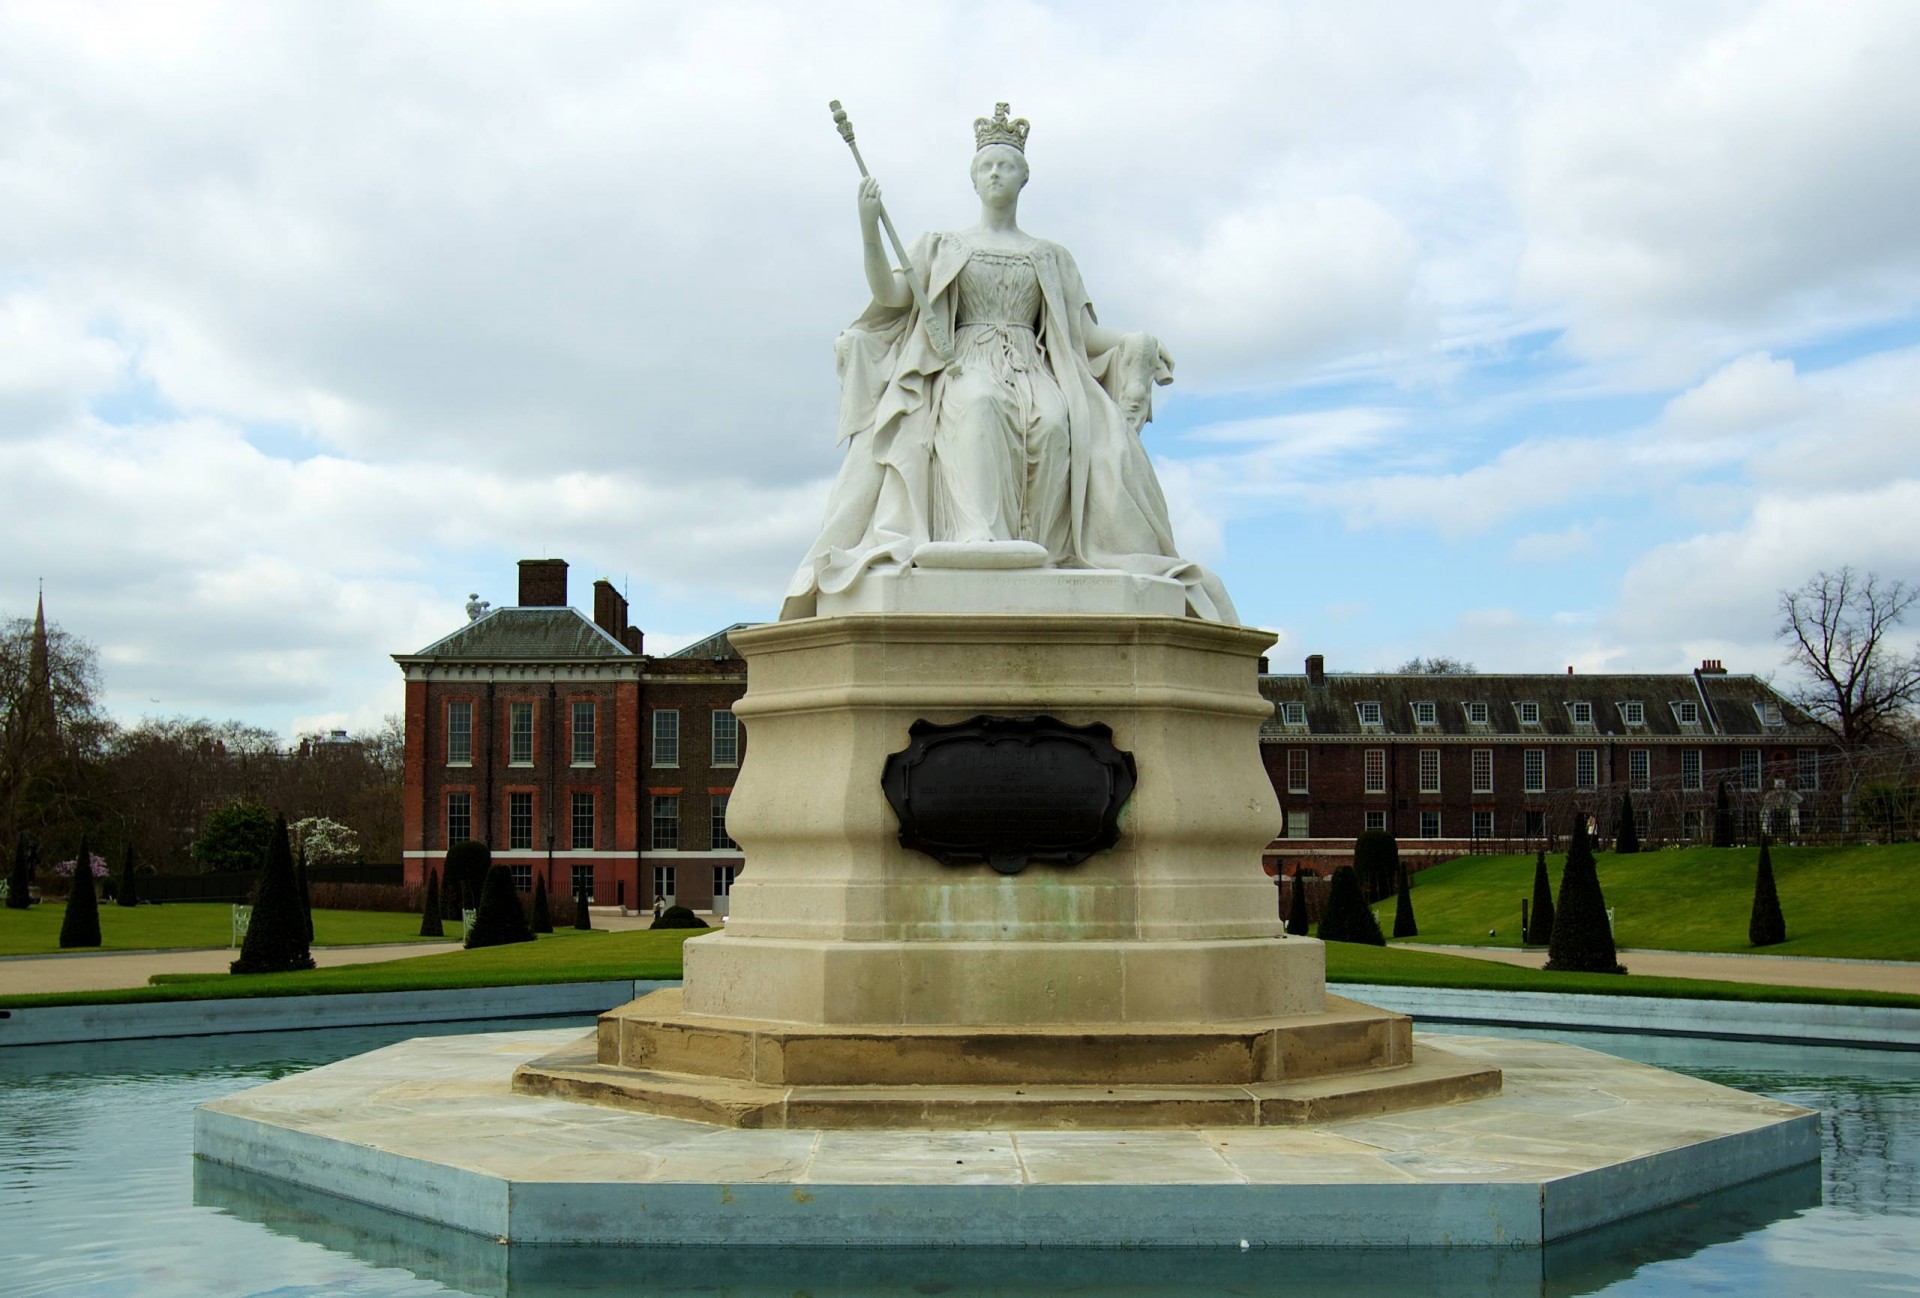 In front of the east front public entrance stands a statue of Queen Victoria, sculpted by her daughter Princess Louise.